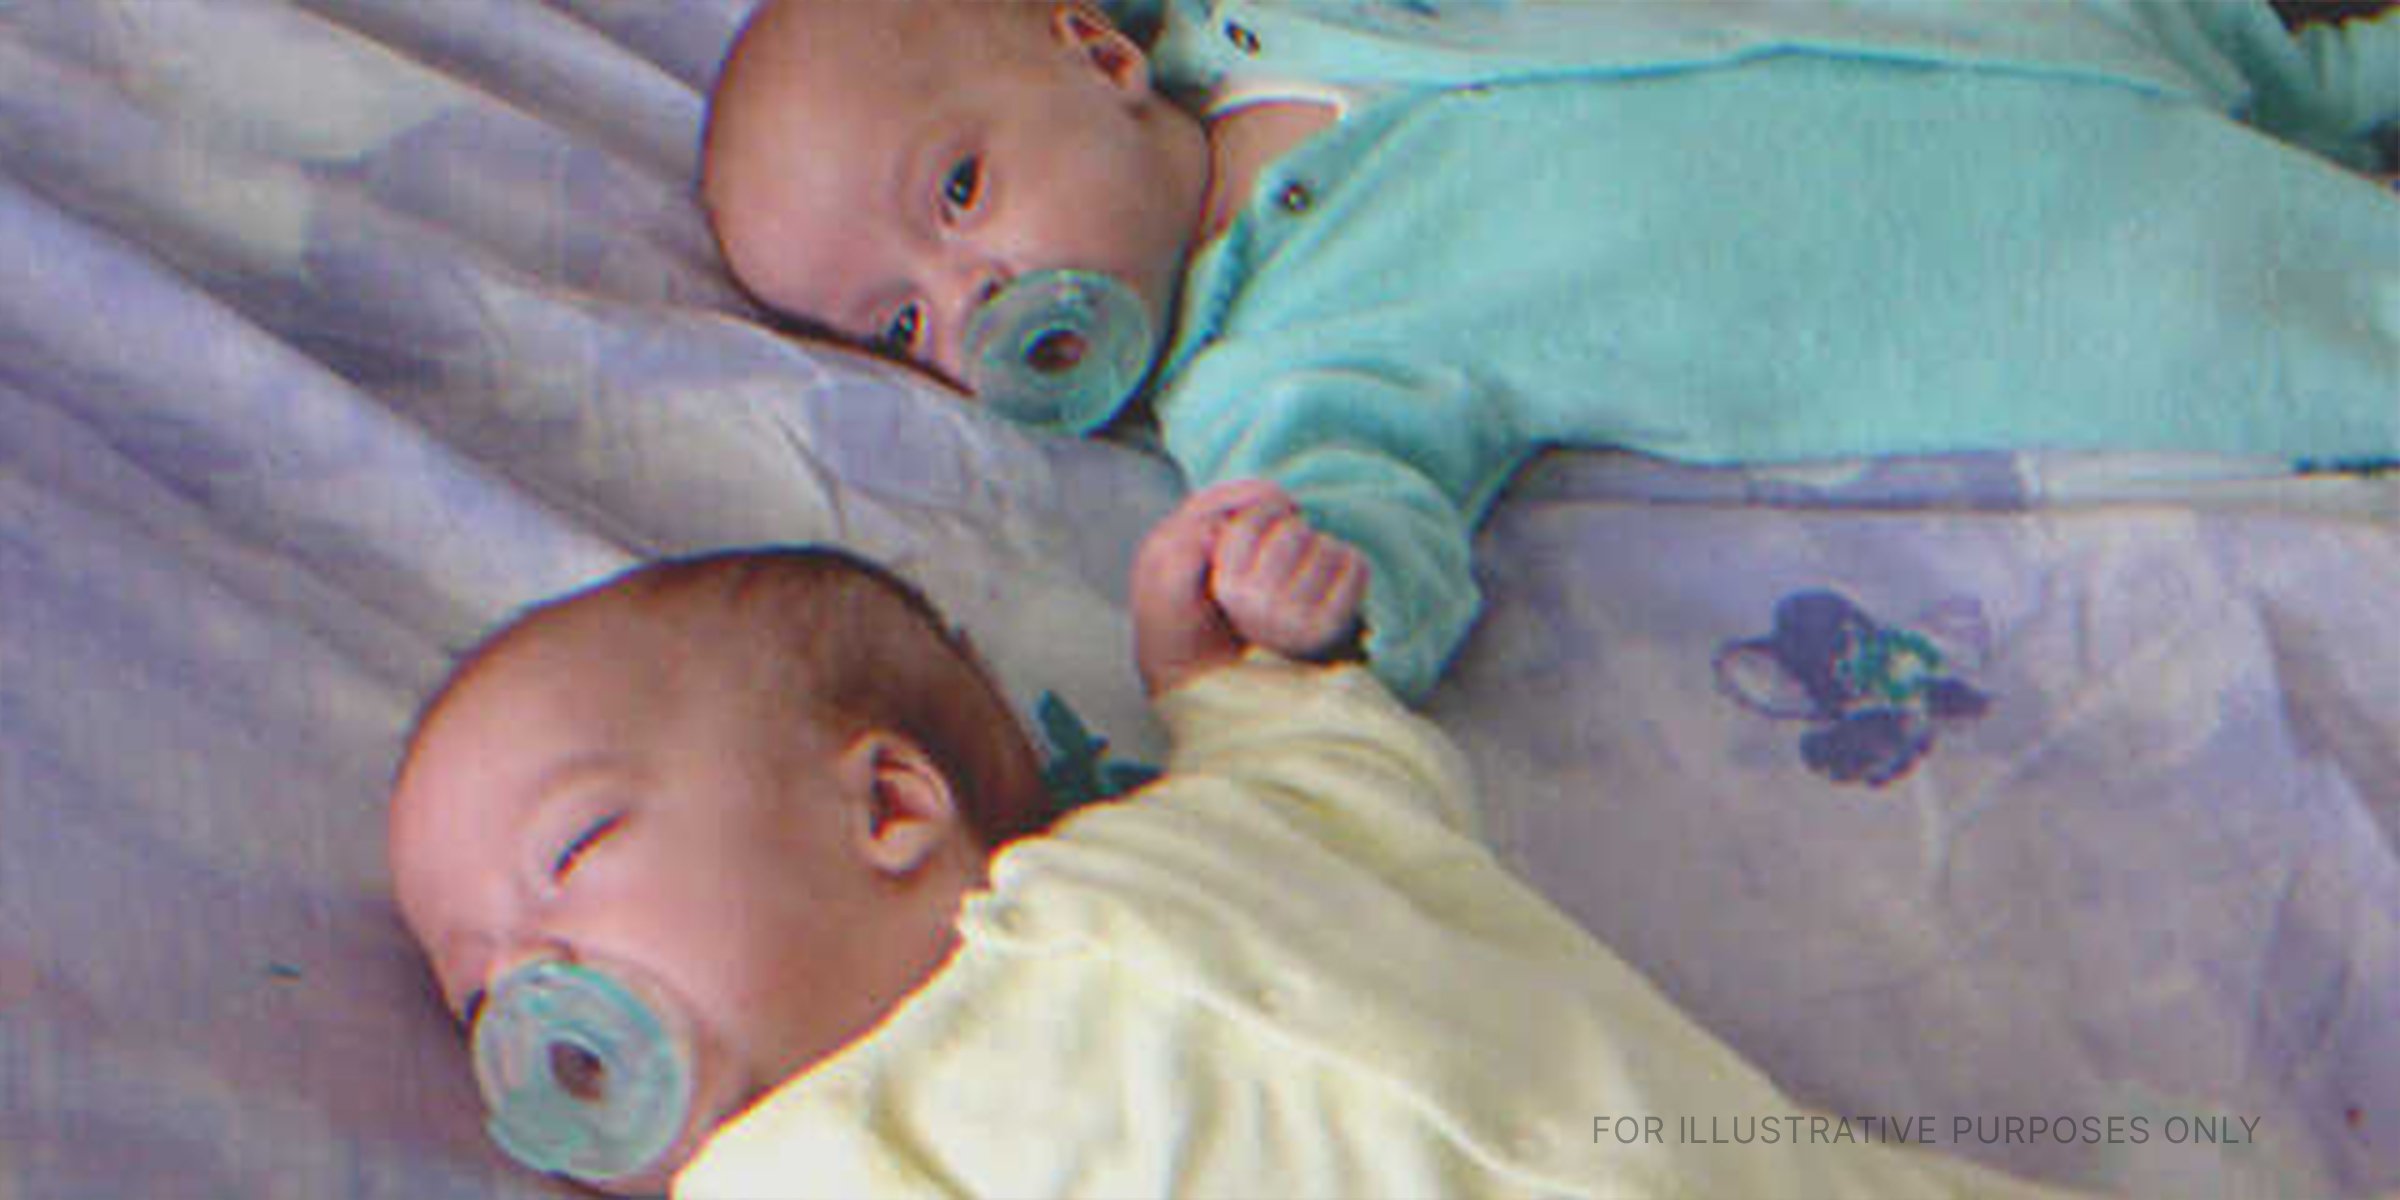 Newborn twins on the bed | Source: Flickr by goldberg(CC BY 2.0)